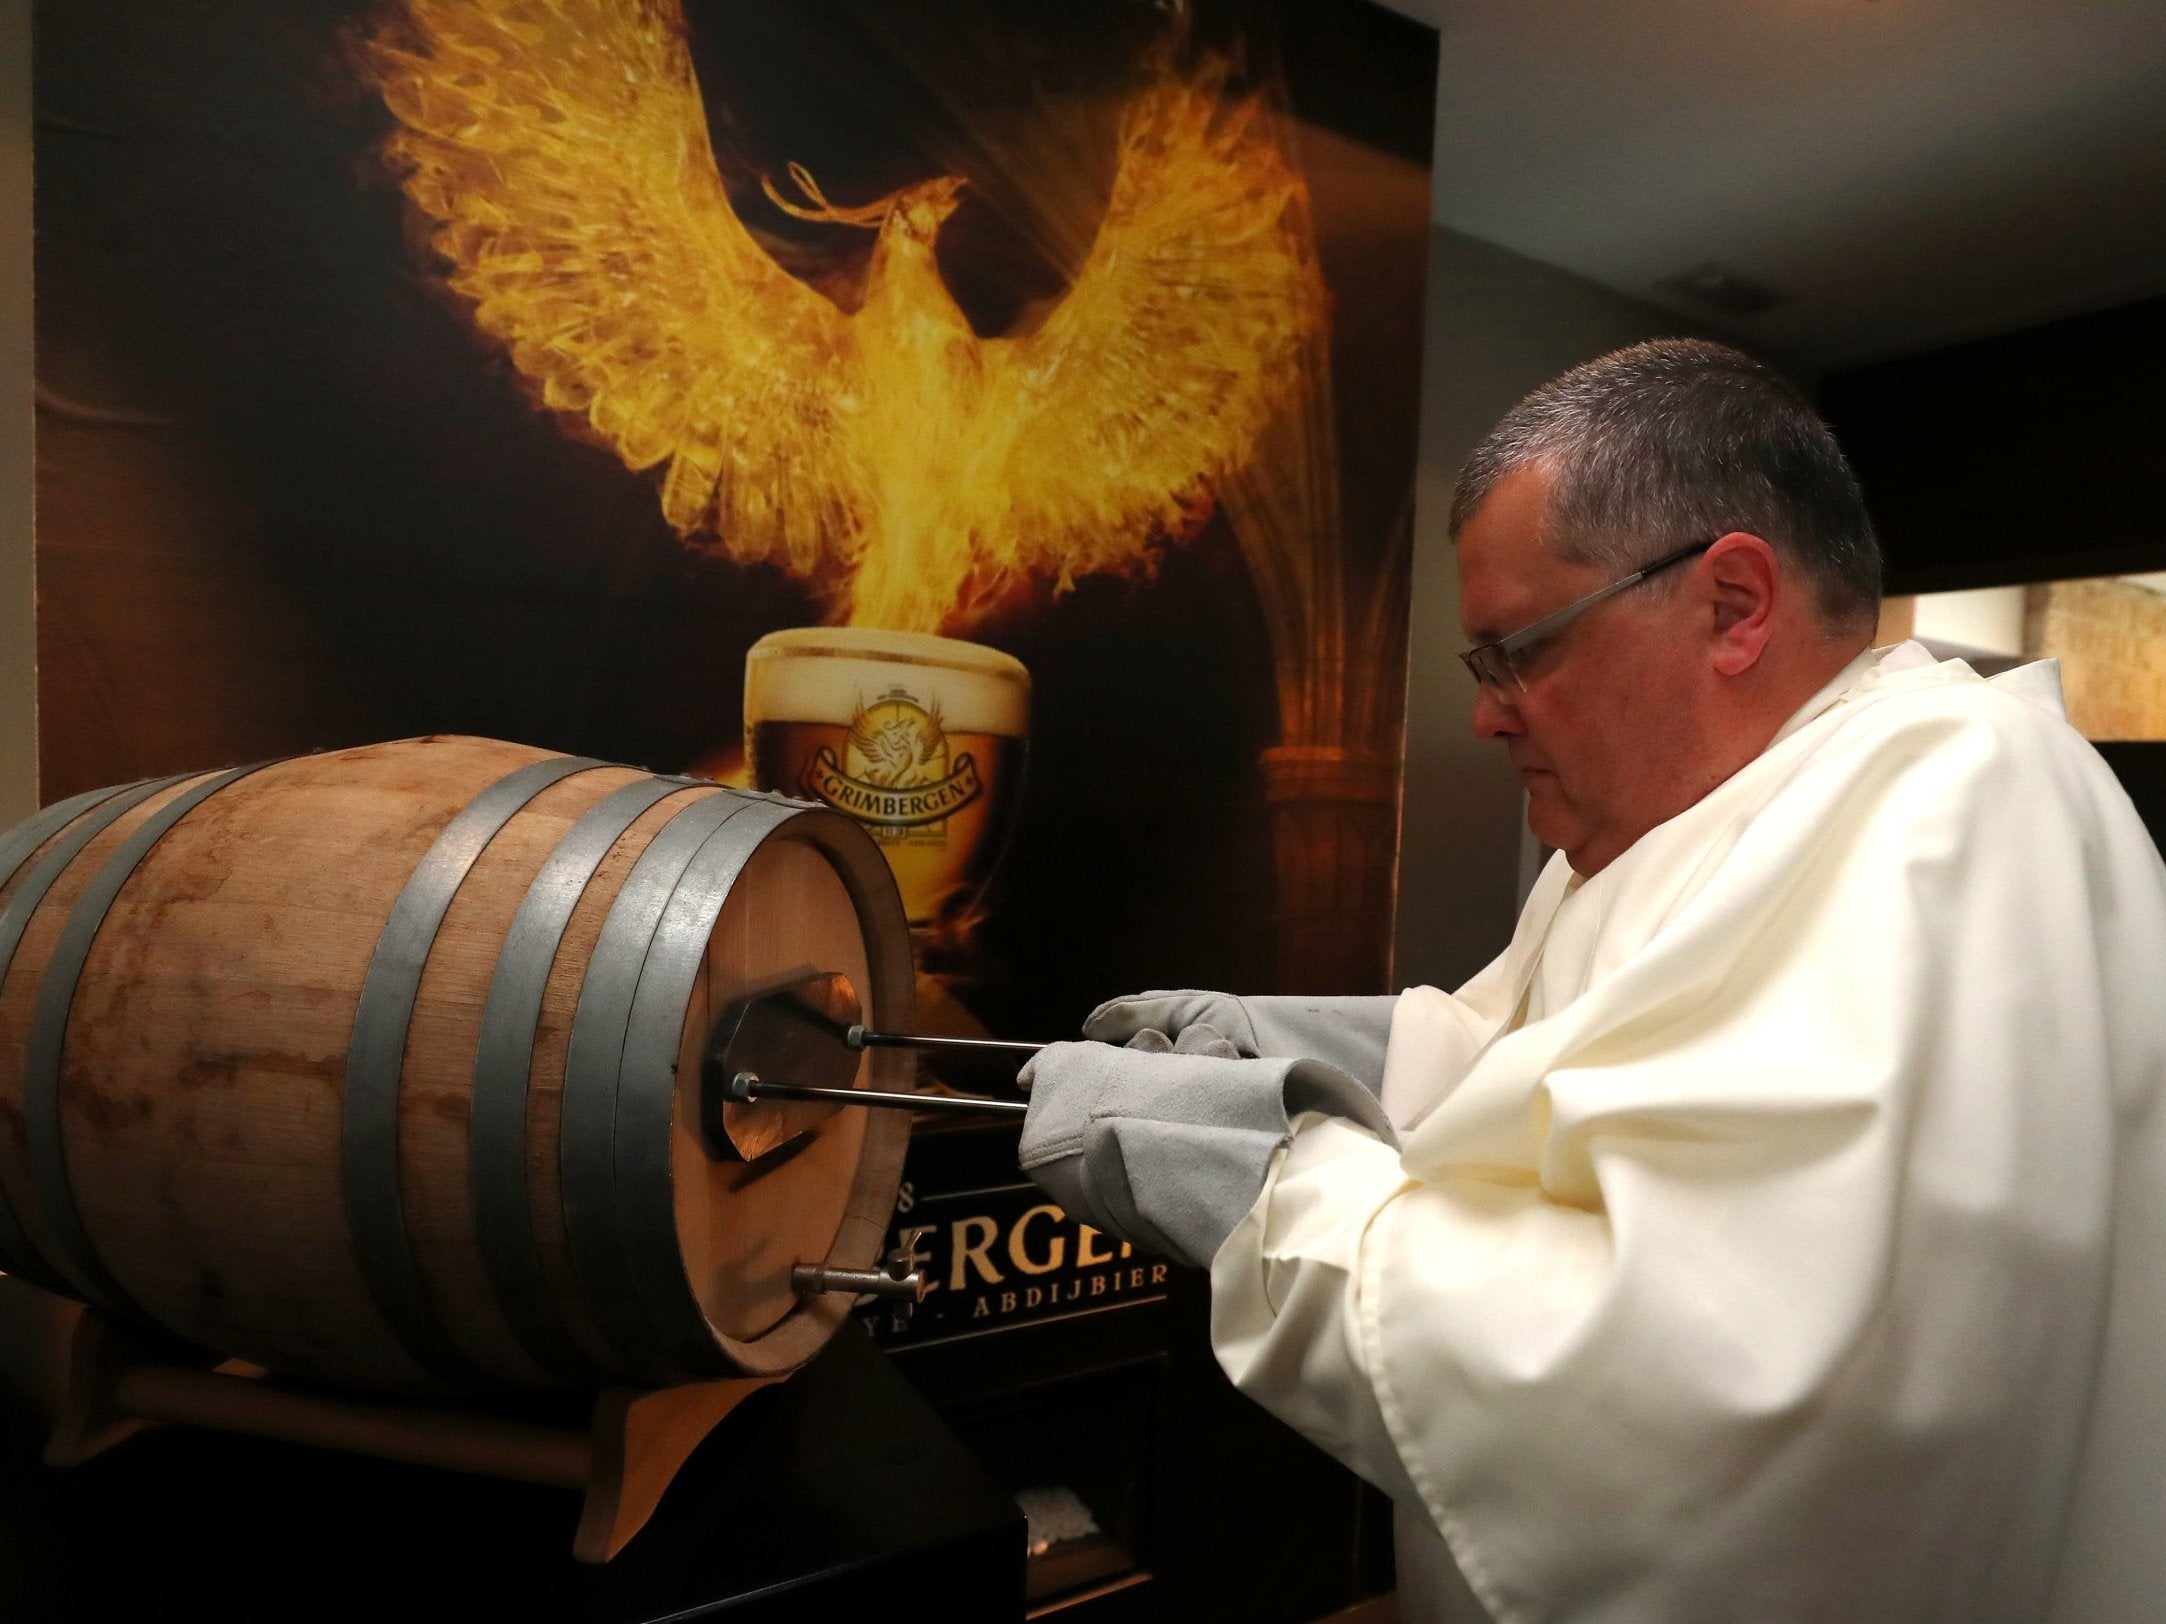 &#13; Norbertine Father Karel marks a barrel of Grimbergen beer, symbolised by a phoenix, at Grimbergen Abbey in Belgium. &#13;